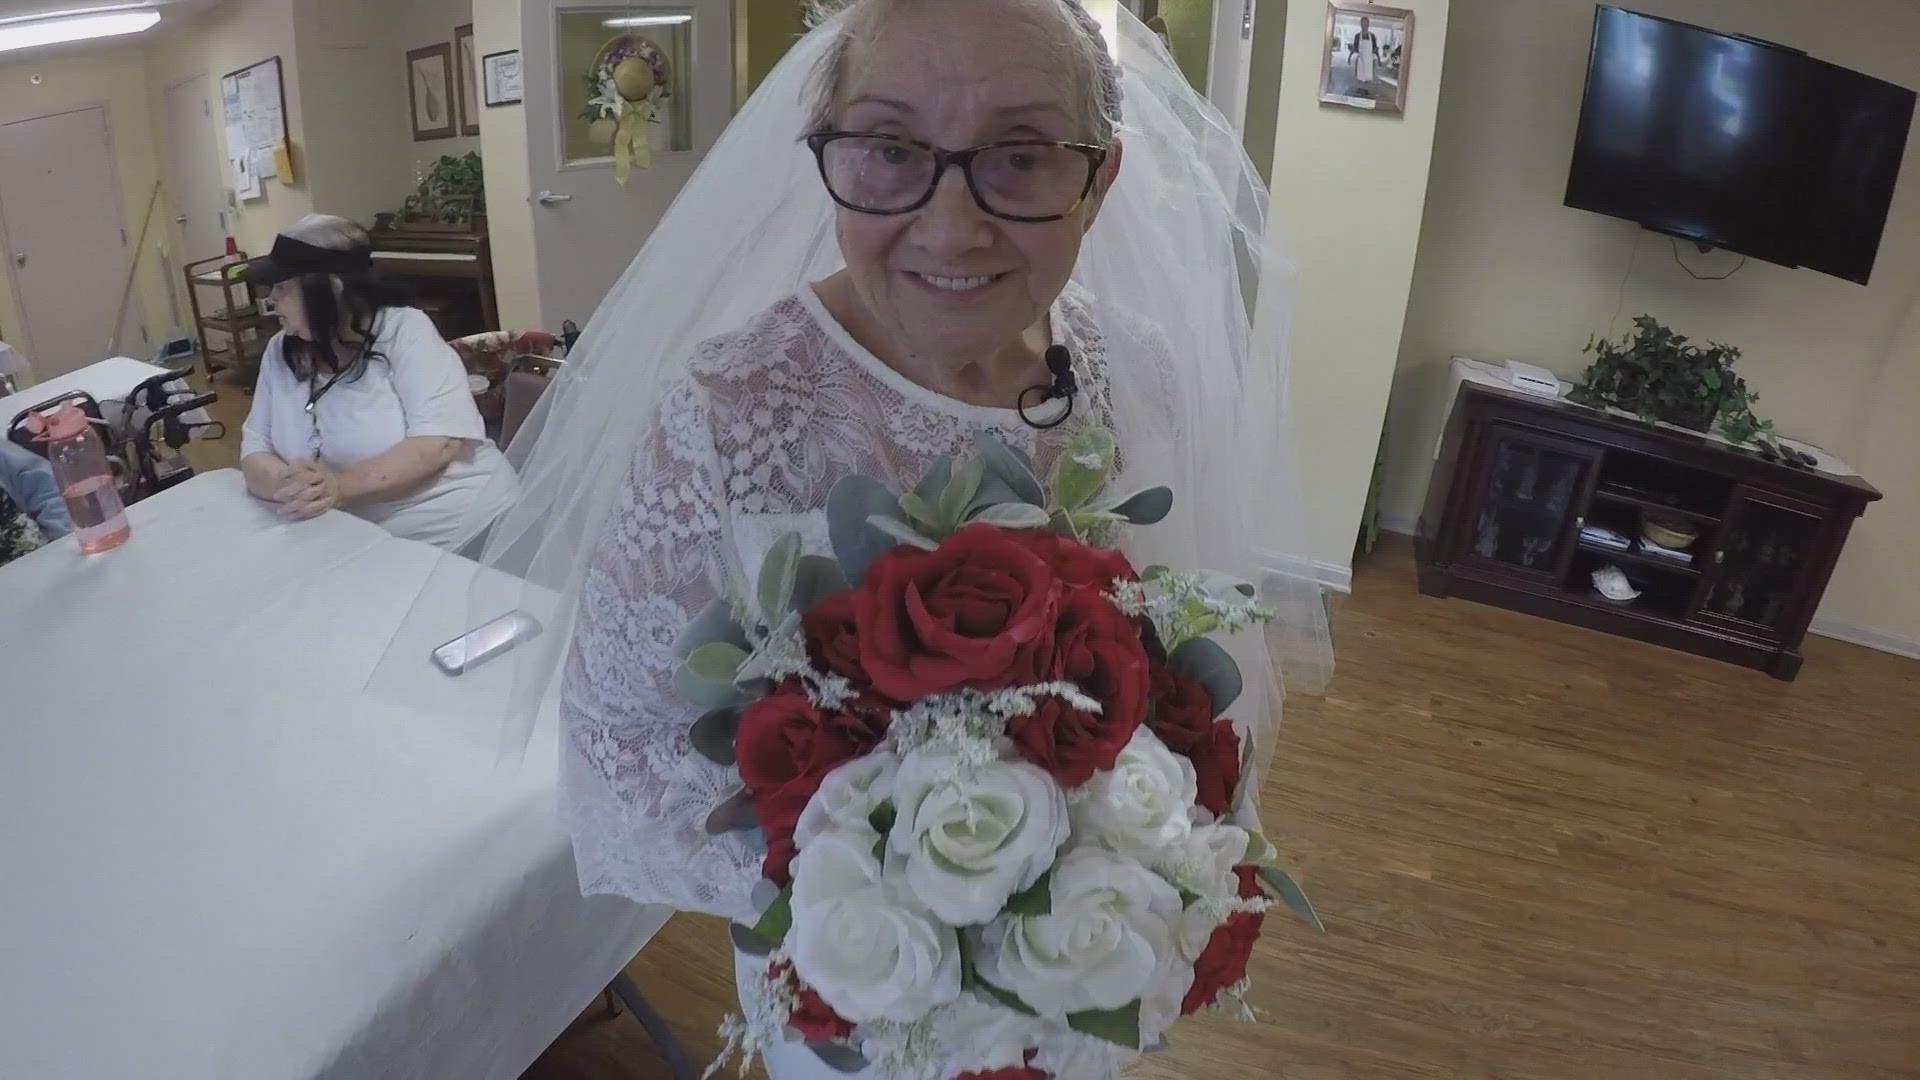 Dorothy Fideli will walk down the aisle to marry the love of her life, herself, after being proudly single for 40 years.